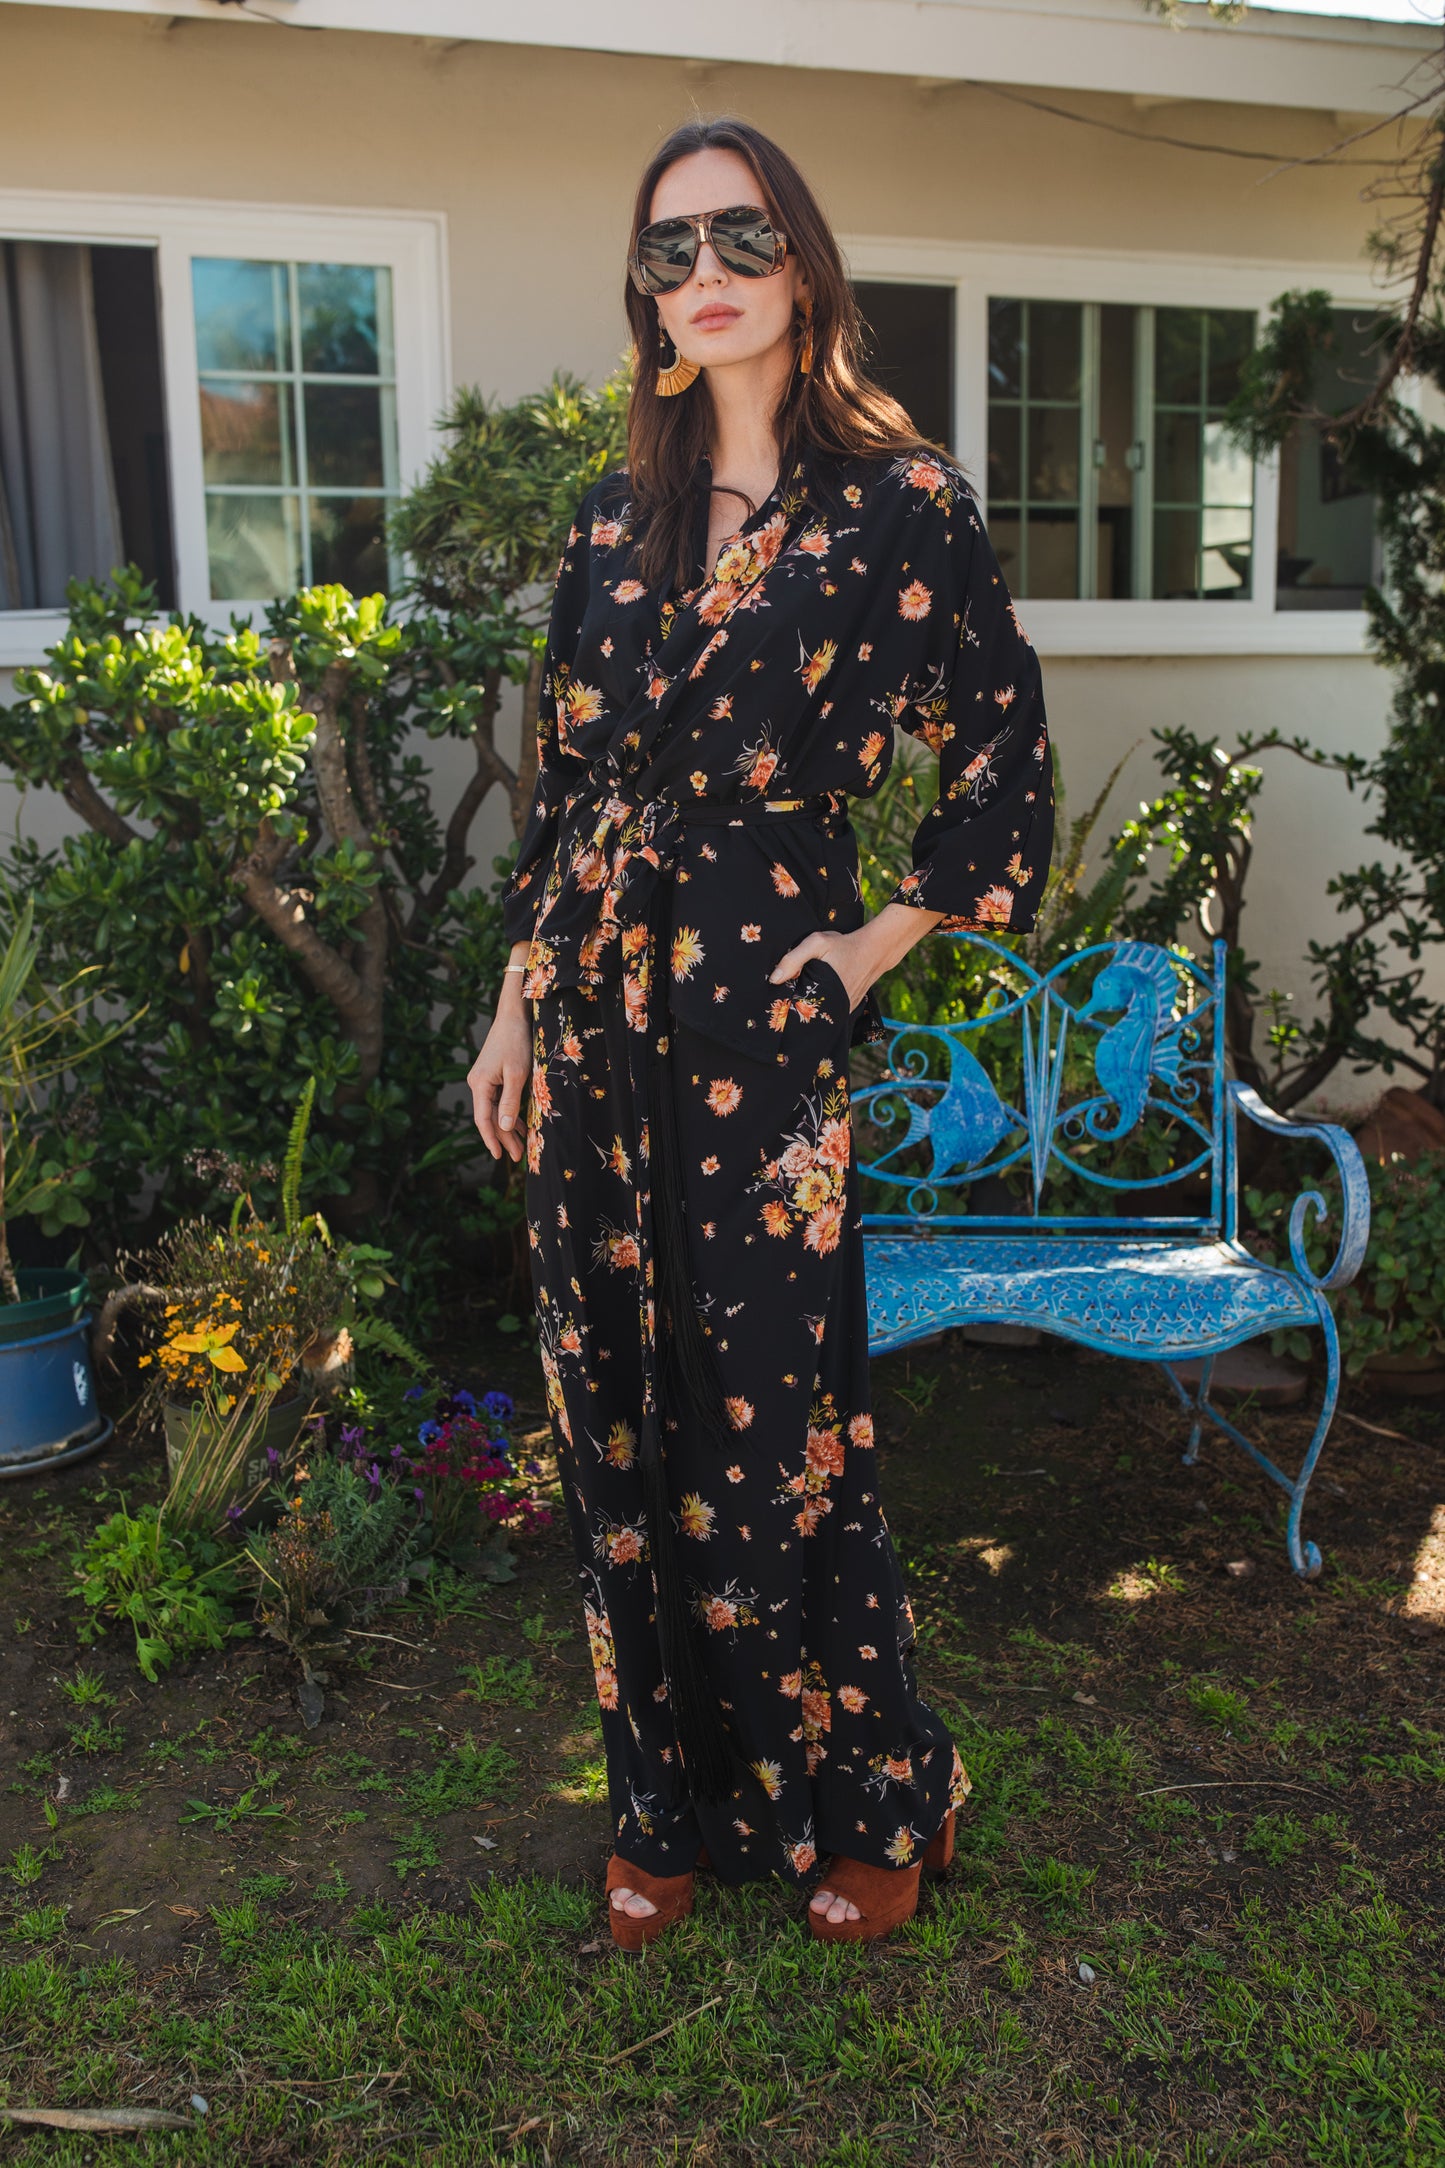 jennafer grace Briar dolman palazzo set silky black georgette with vibrant yellow pink floral print matching co-ord coord set wrap blouse top with tasseled belt and palazzo pant with pockets and elastic waist boho bohemian hippie romantic whimsical glamorous pajamas pjs glam lounge wear handmade in california usa